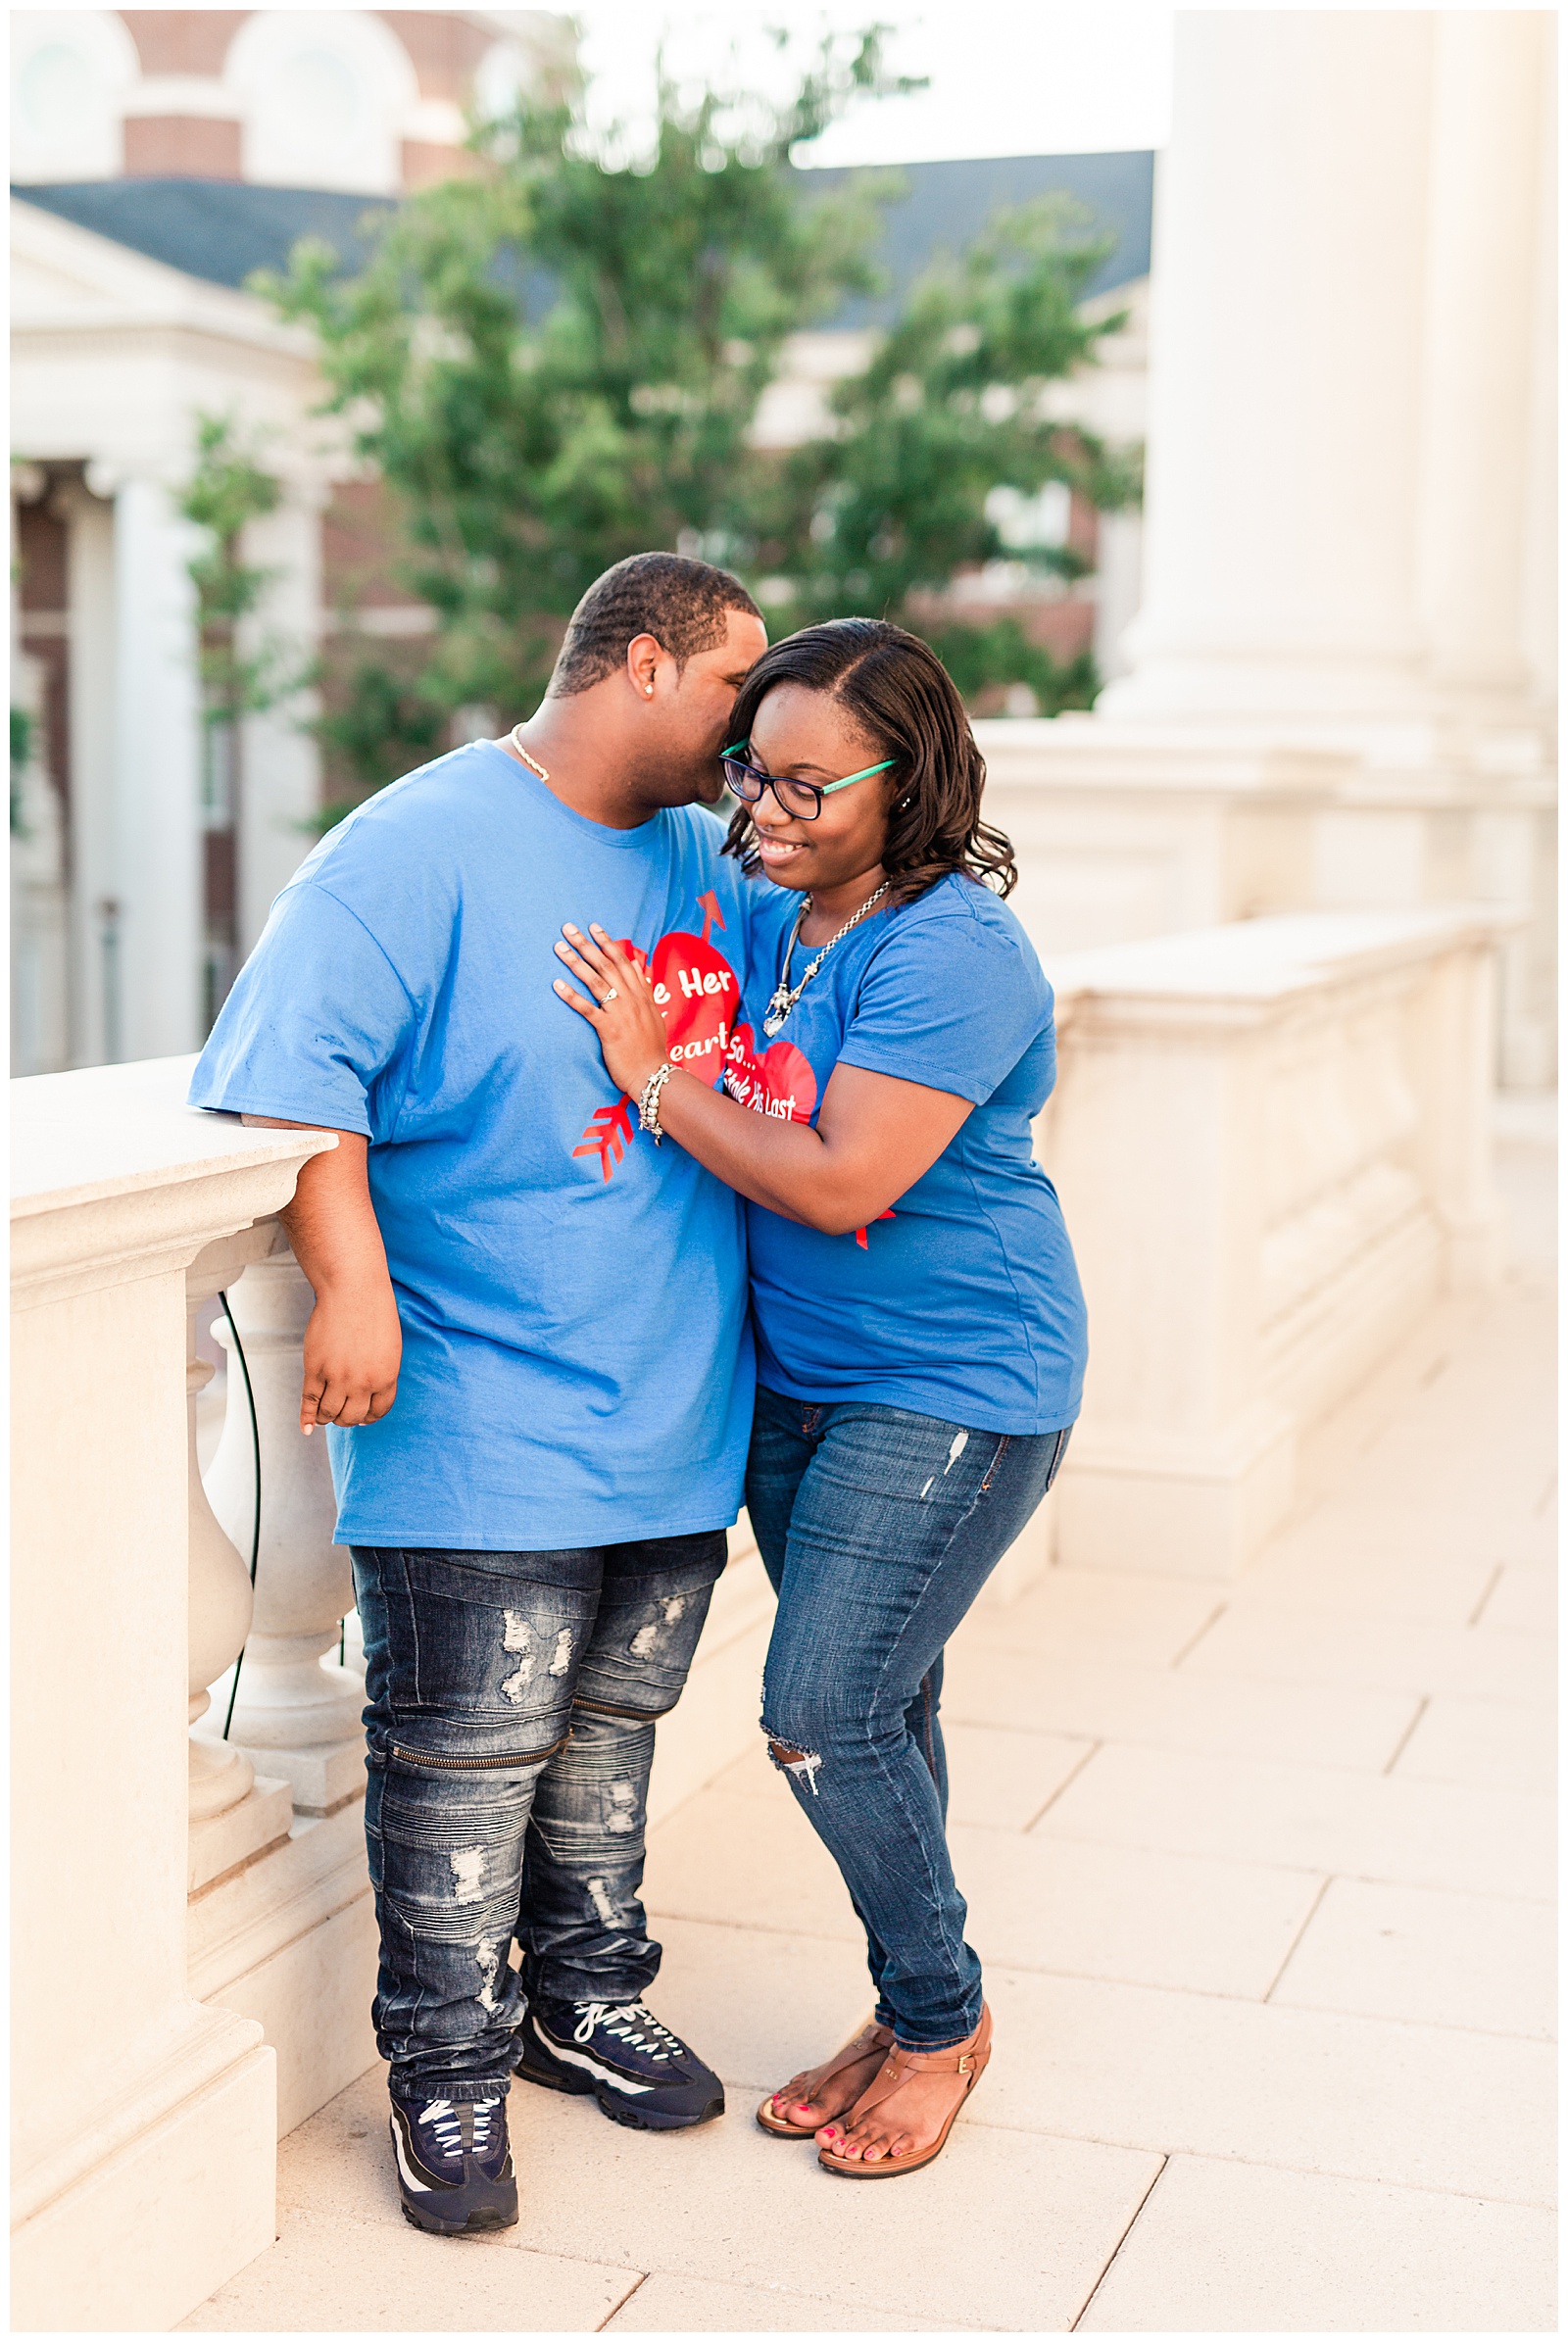 cnu-summer-engagement-session-charneice-kevin-24.jpg